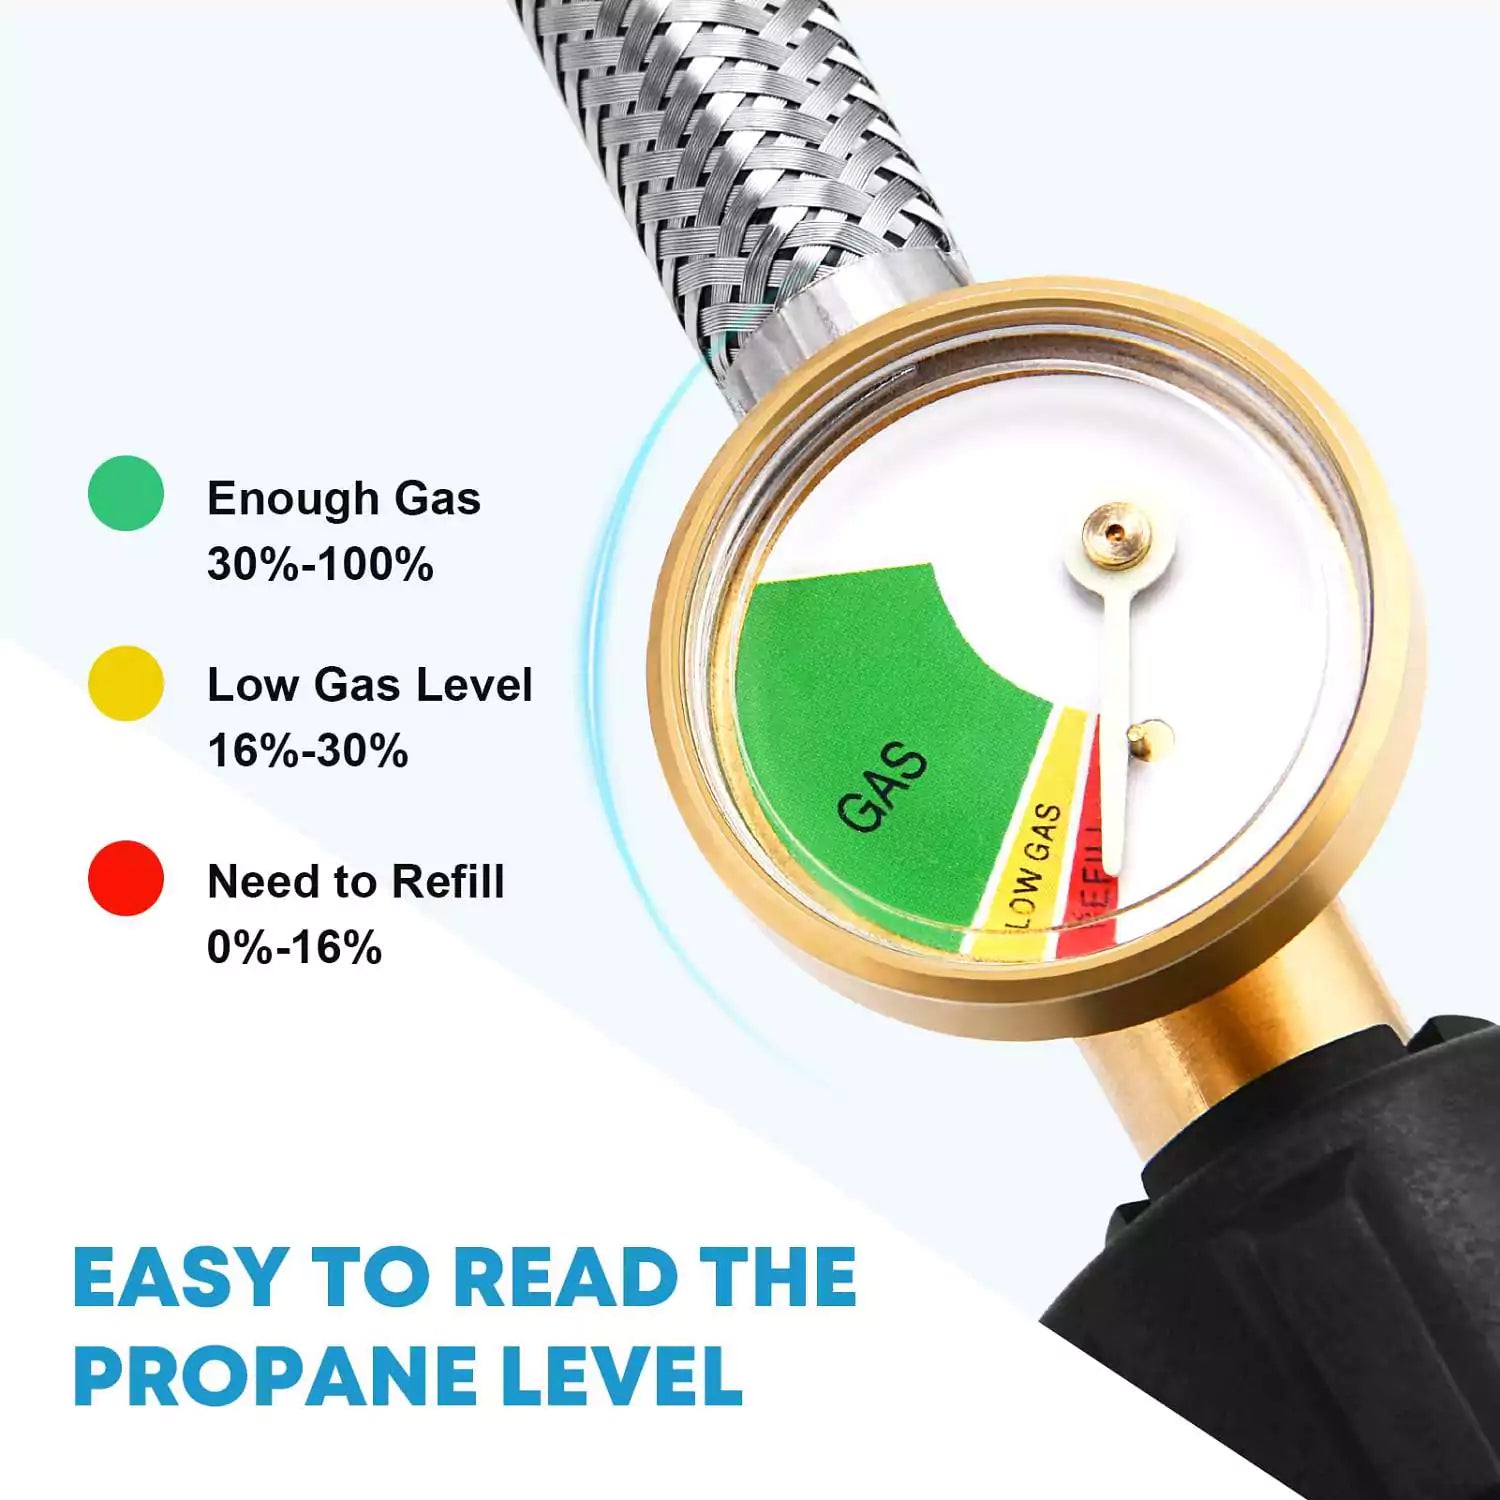 Easy to read the propane level